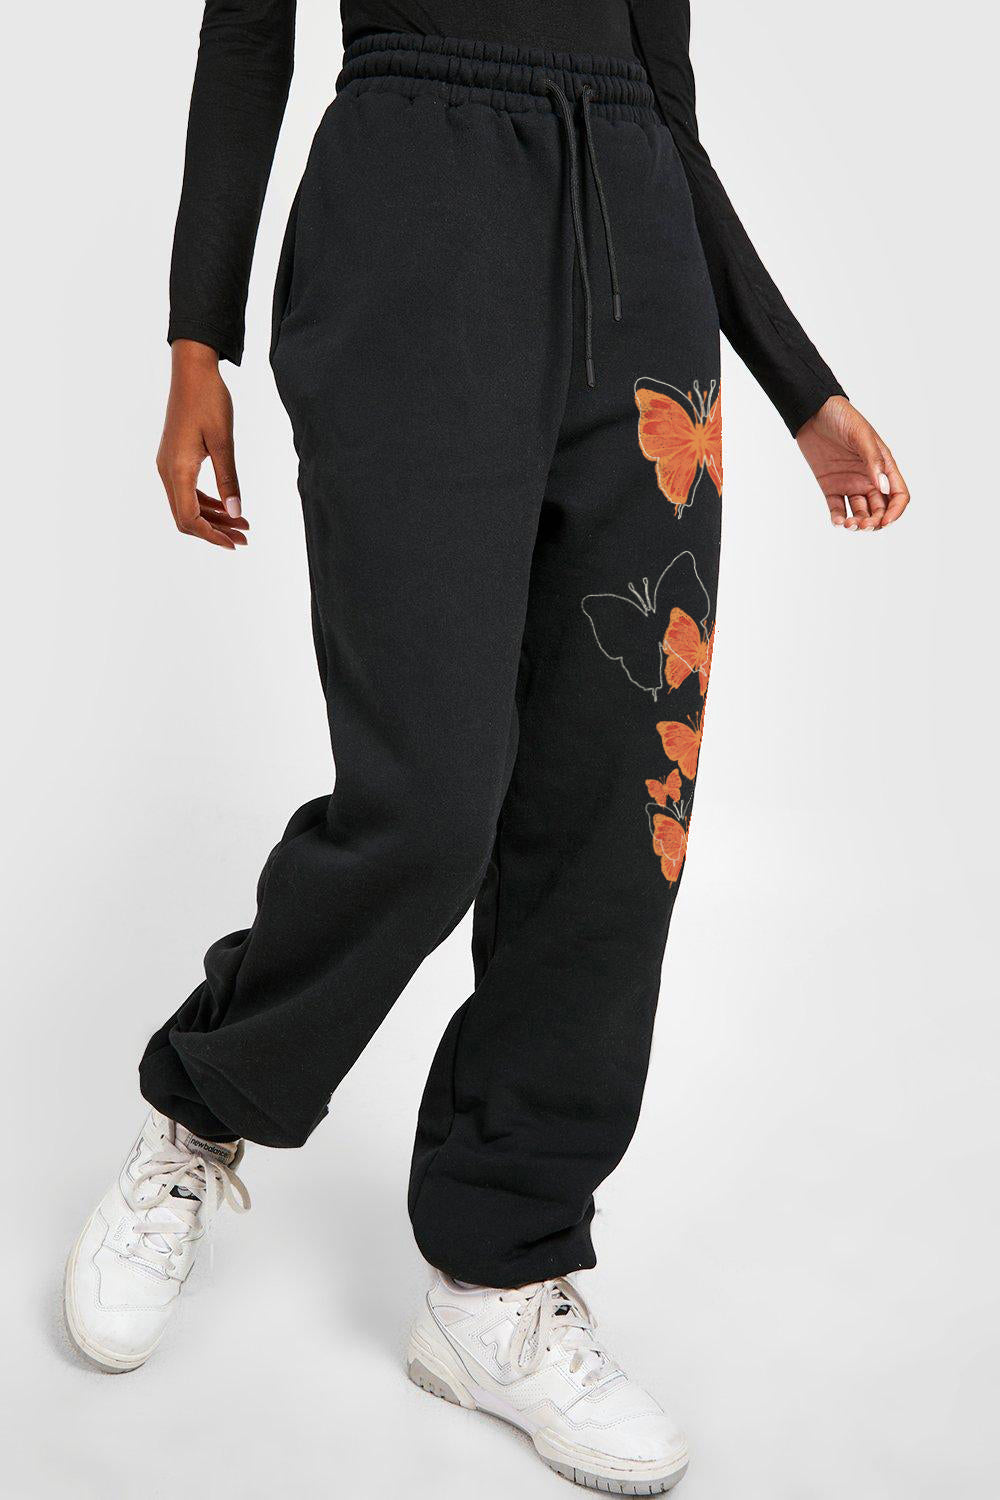 Butterfly Graphic Sweatpants